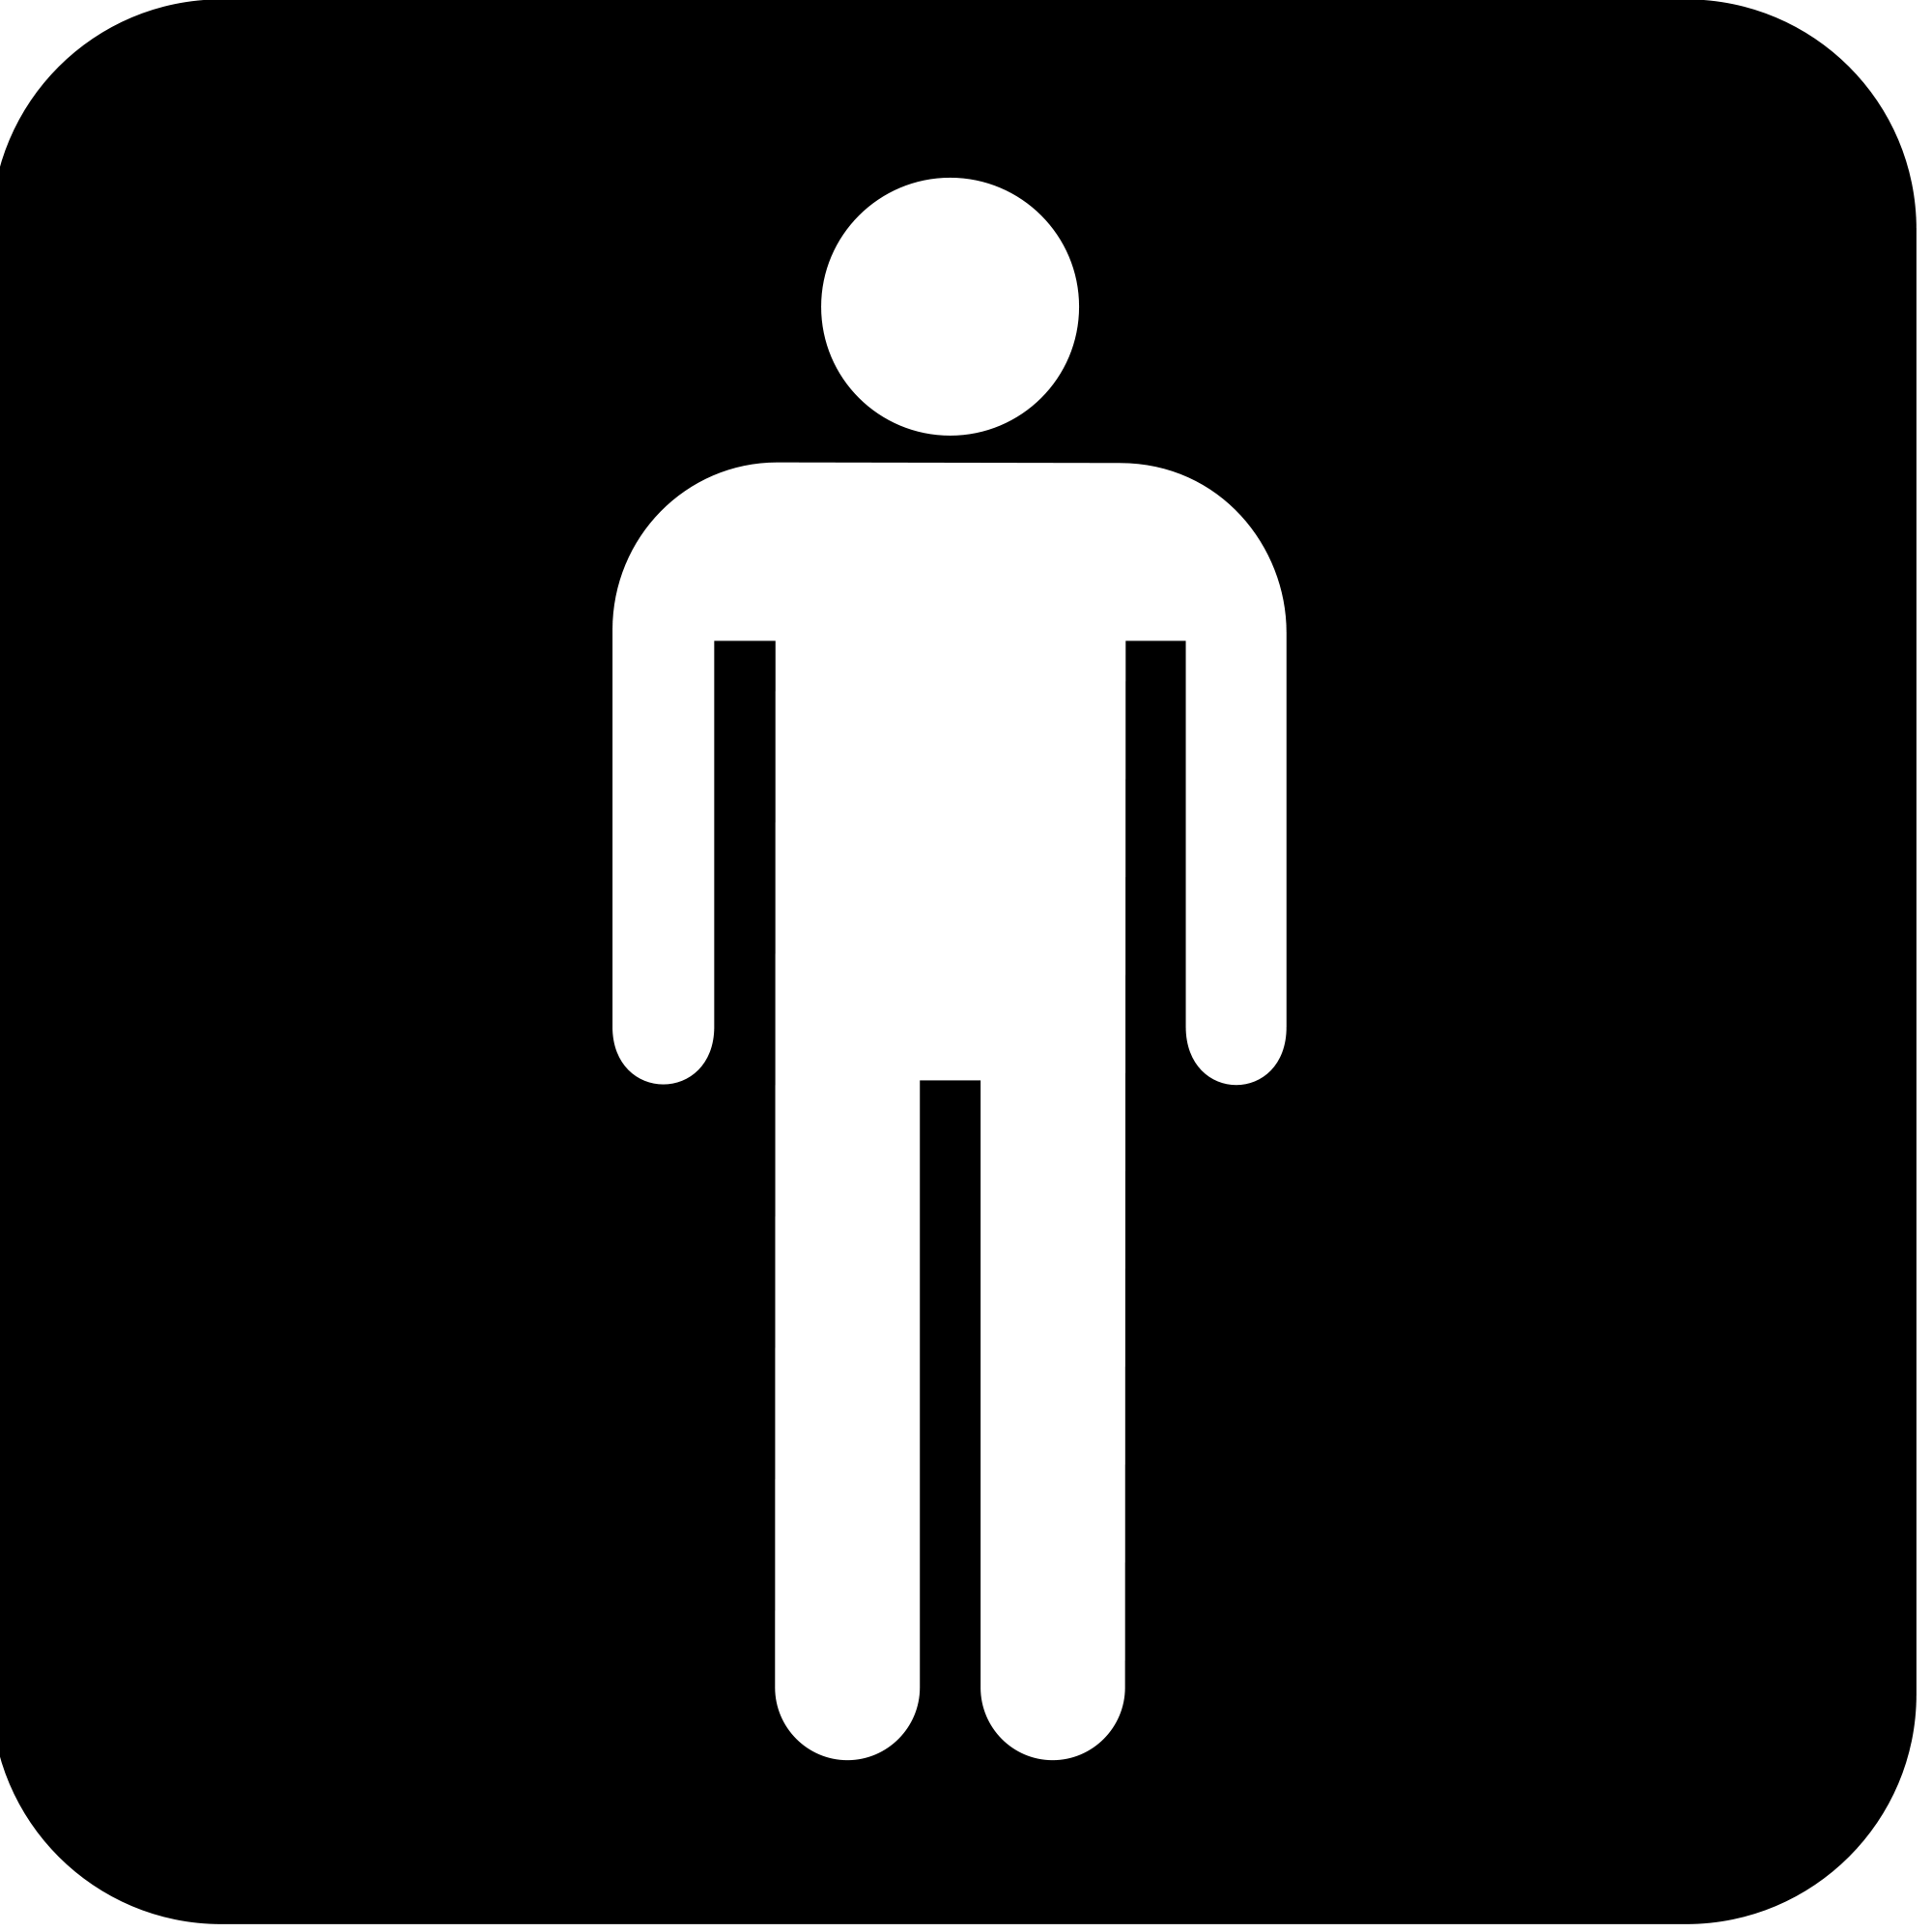 File:Pictograms-nps-accommodations-mens-restroom-2.svg - Wikimedia ...